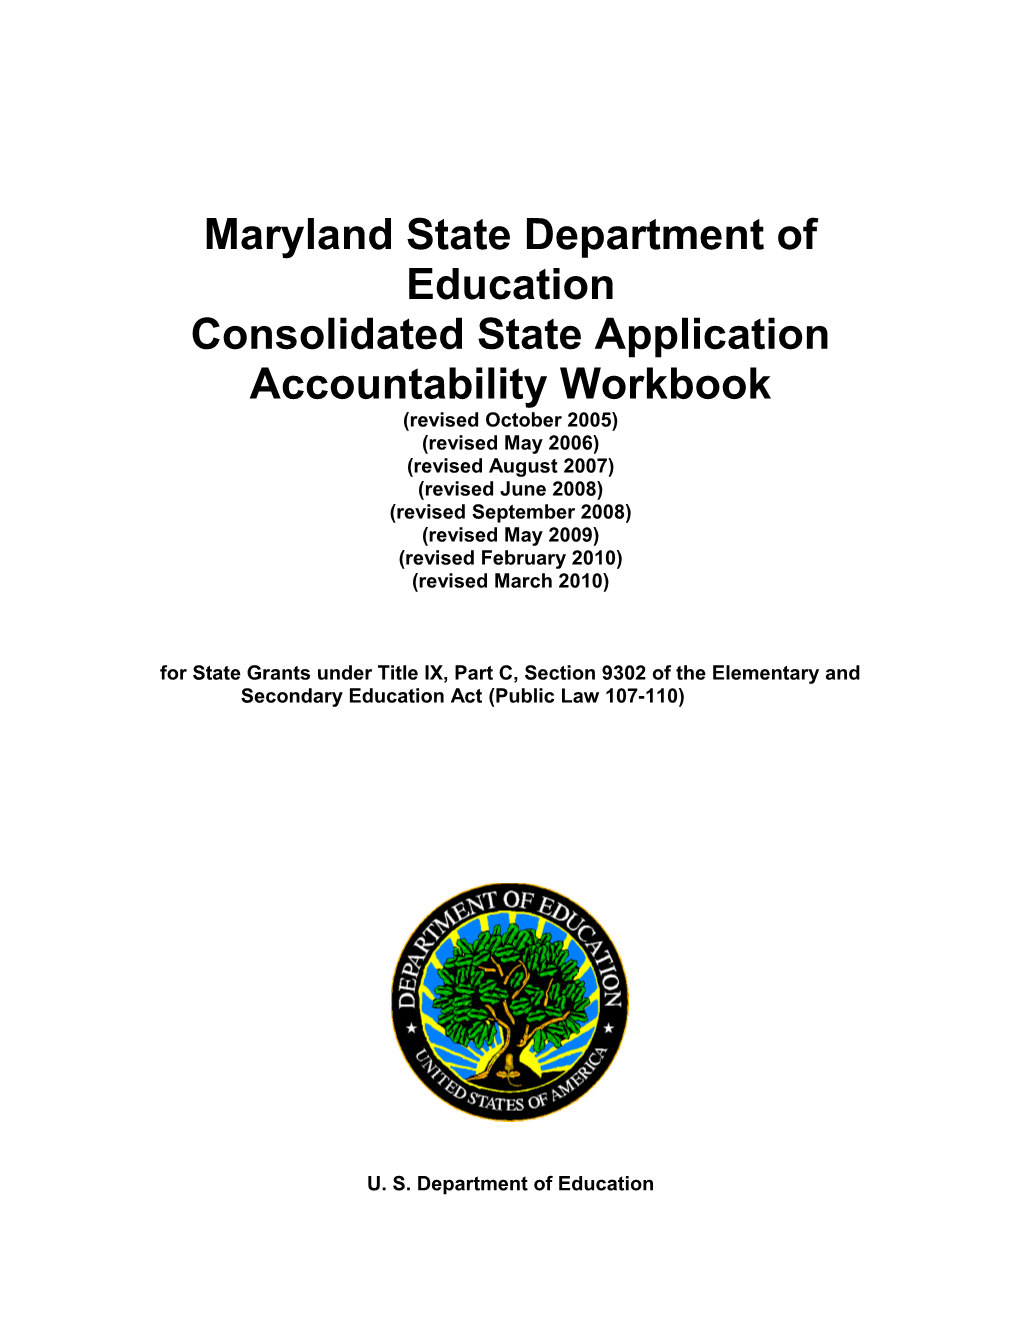 Maryland Consolidated State Application Accountability Workbook March 2010 (MSWORD)